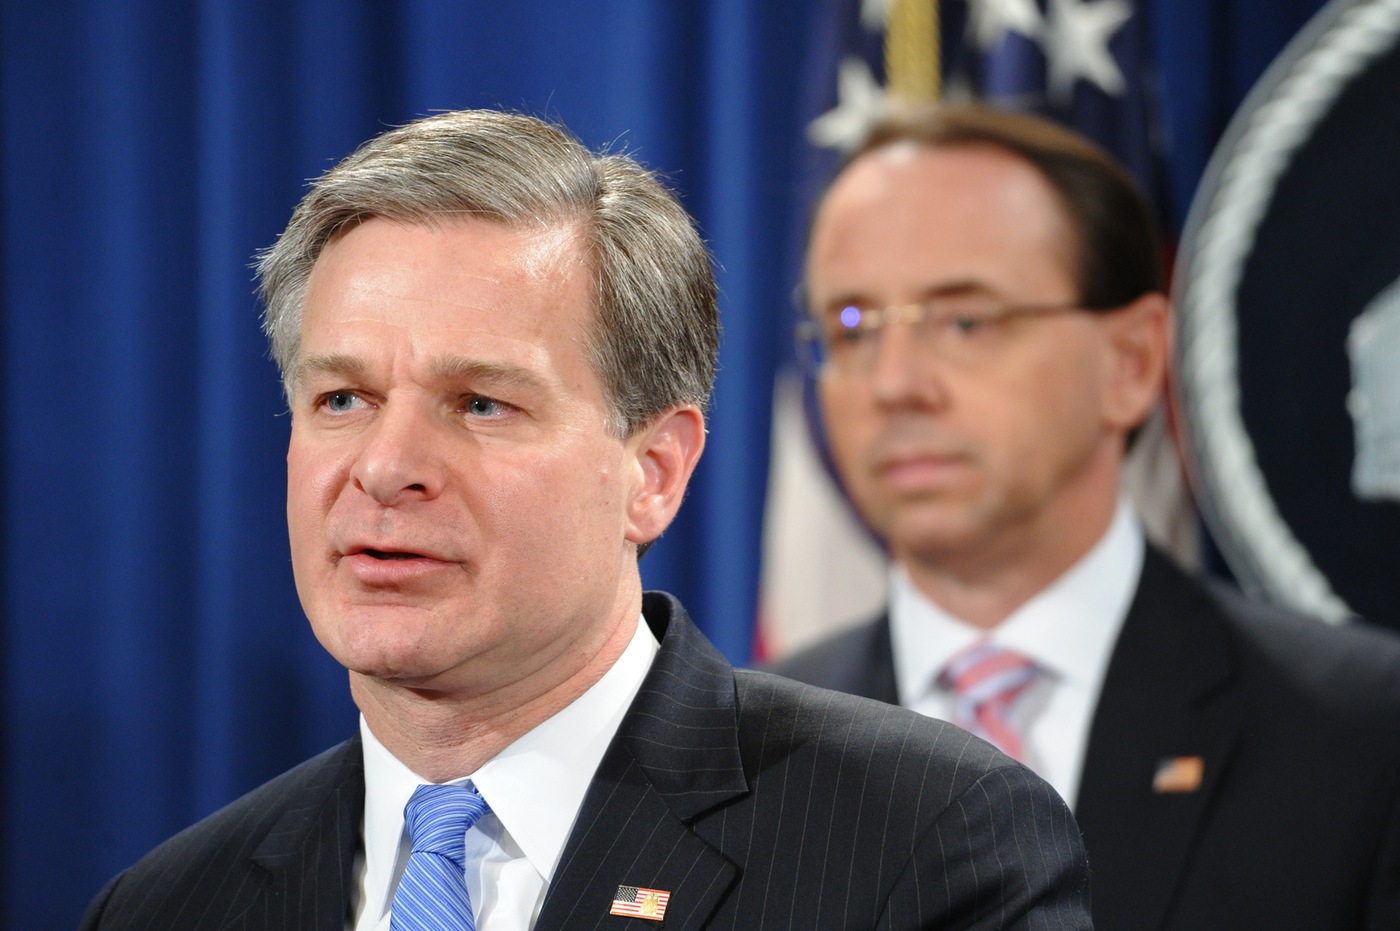 FBI Director Christopher Wray speaks at a December 20, 2018 press conference at the Department of Justice announcing charges against Zhu Hua and Zhang Shilong, both Chinese nationals and members of the APT 10 hacking group, as Deputy Attorney General Rod J. Rosenstein looks on.